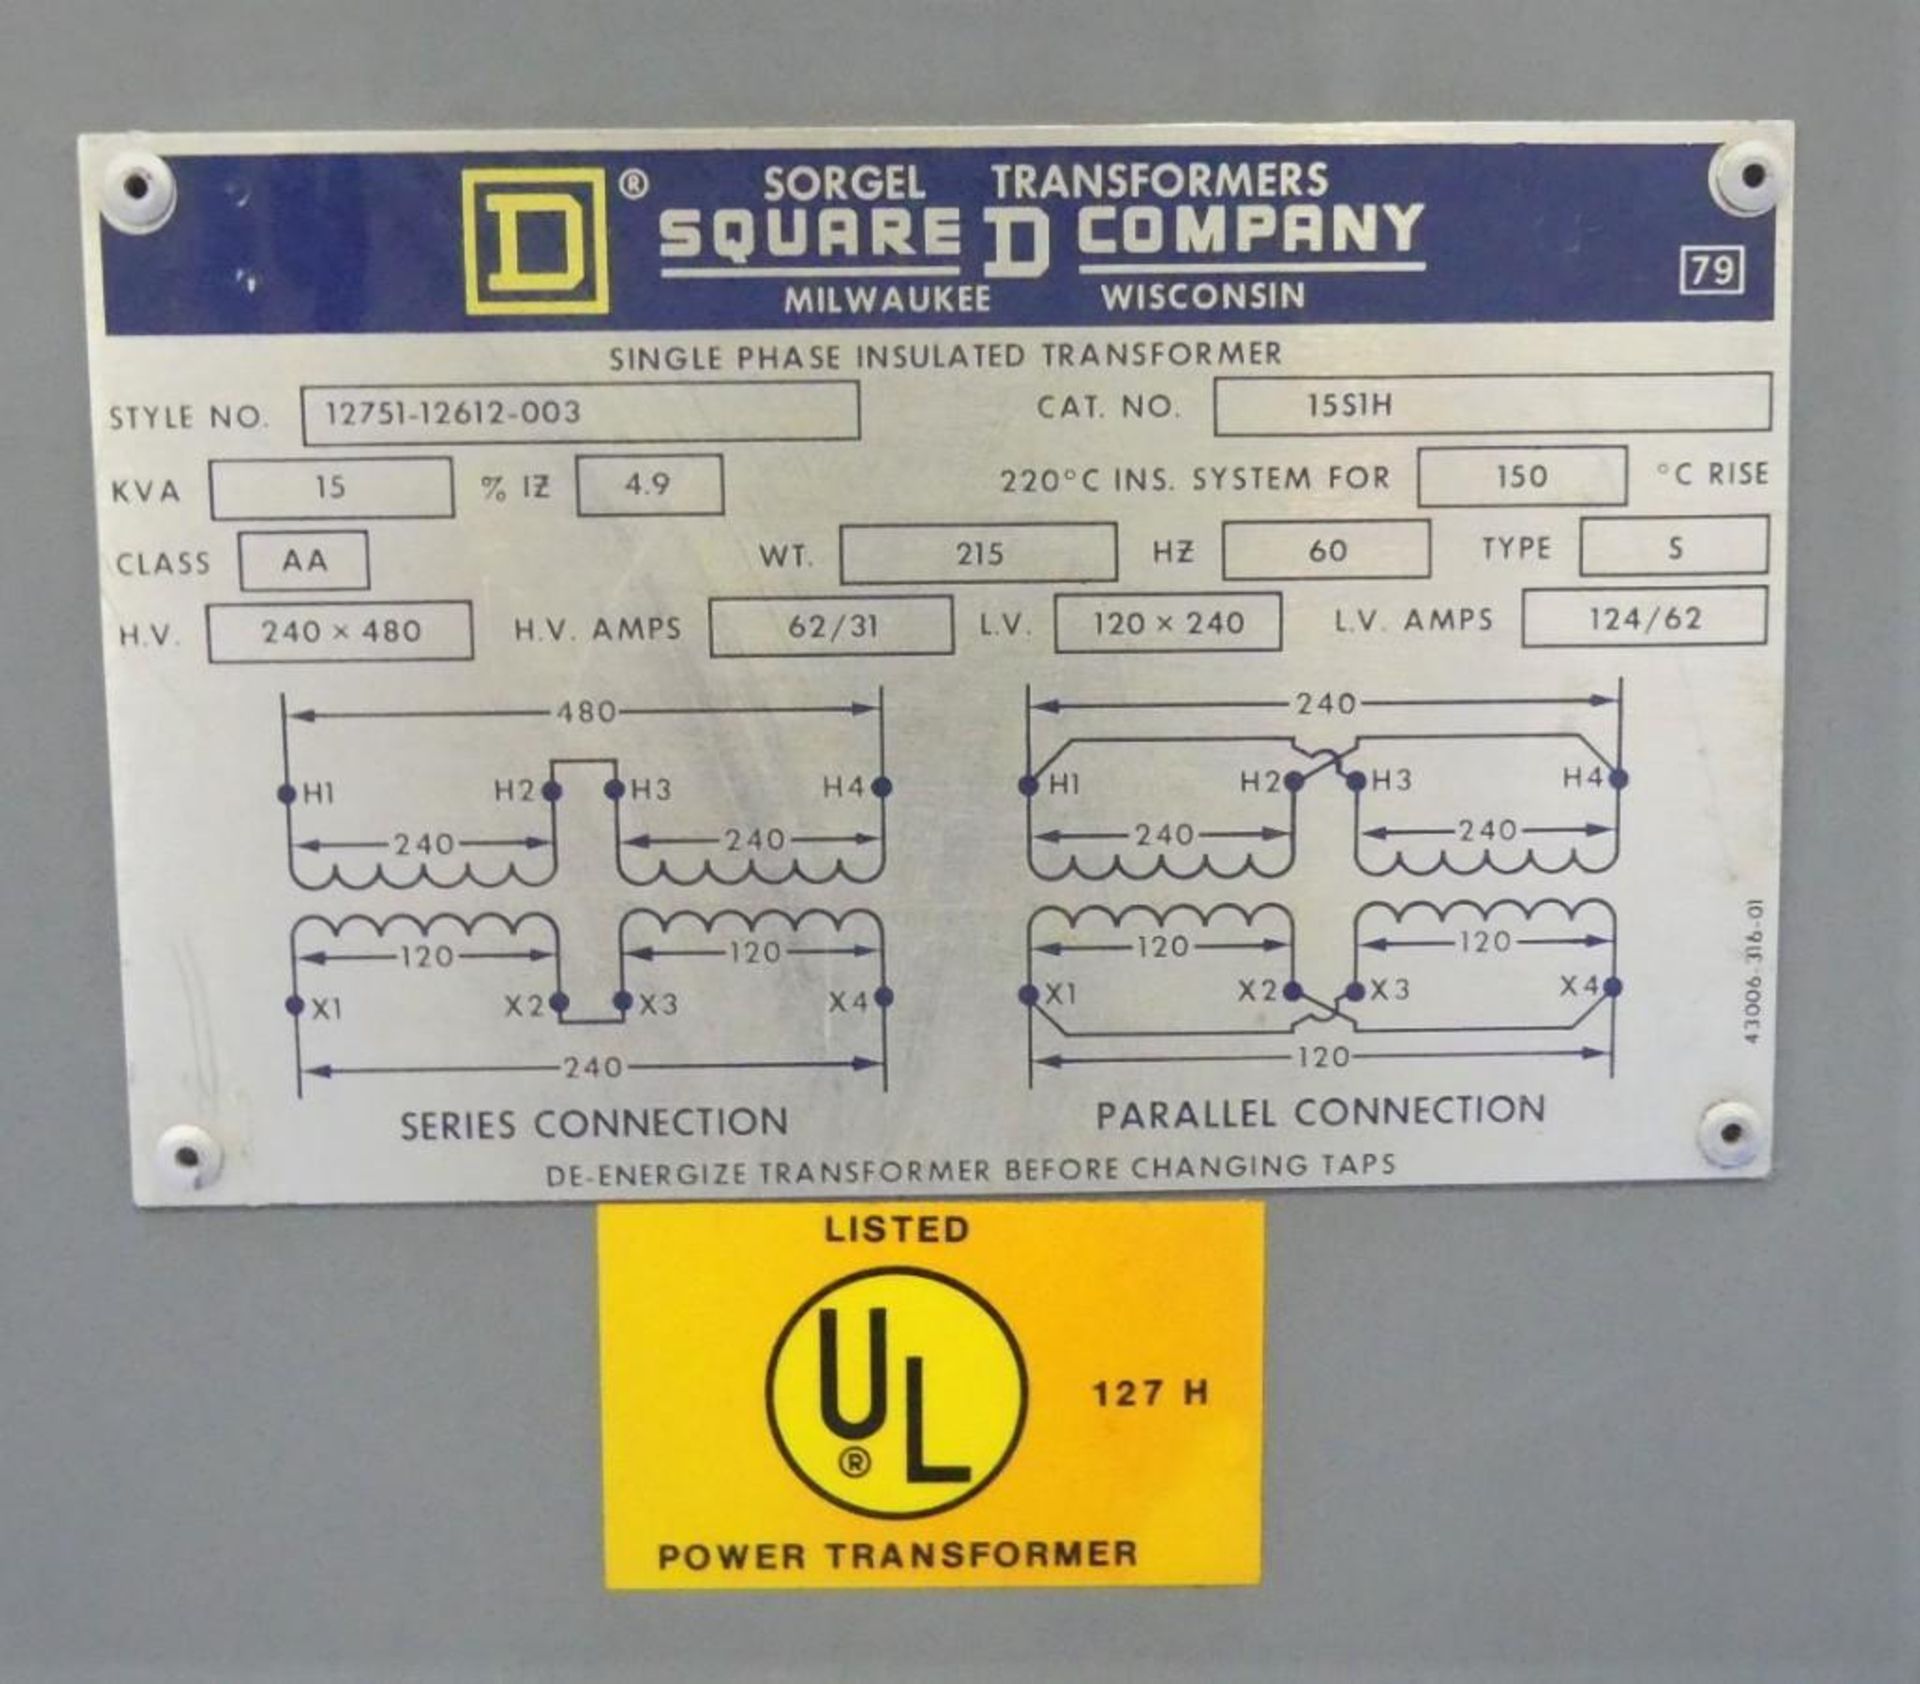 Square D Sorgel Single Phase Insulated Transformer - Image 5 of 5